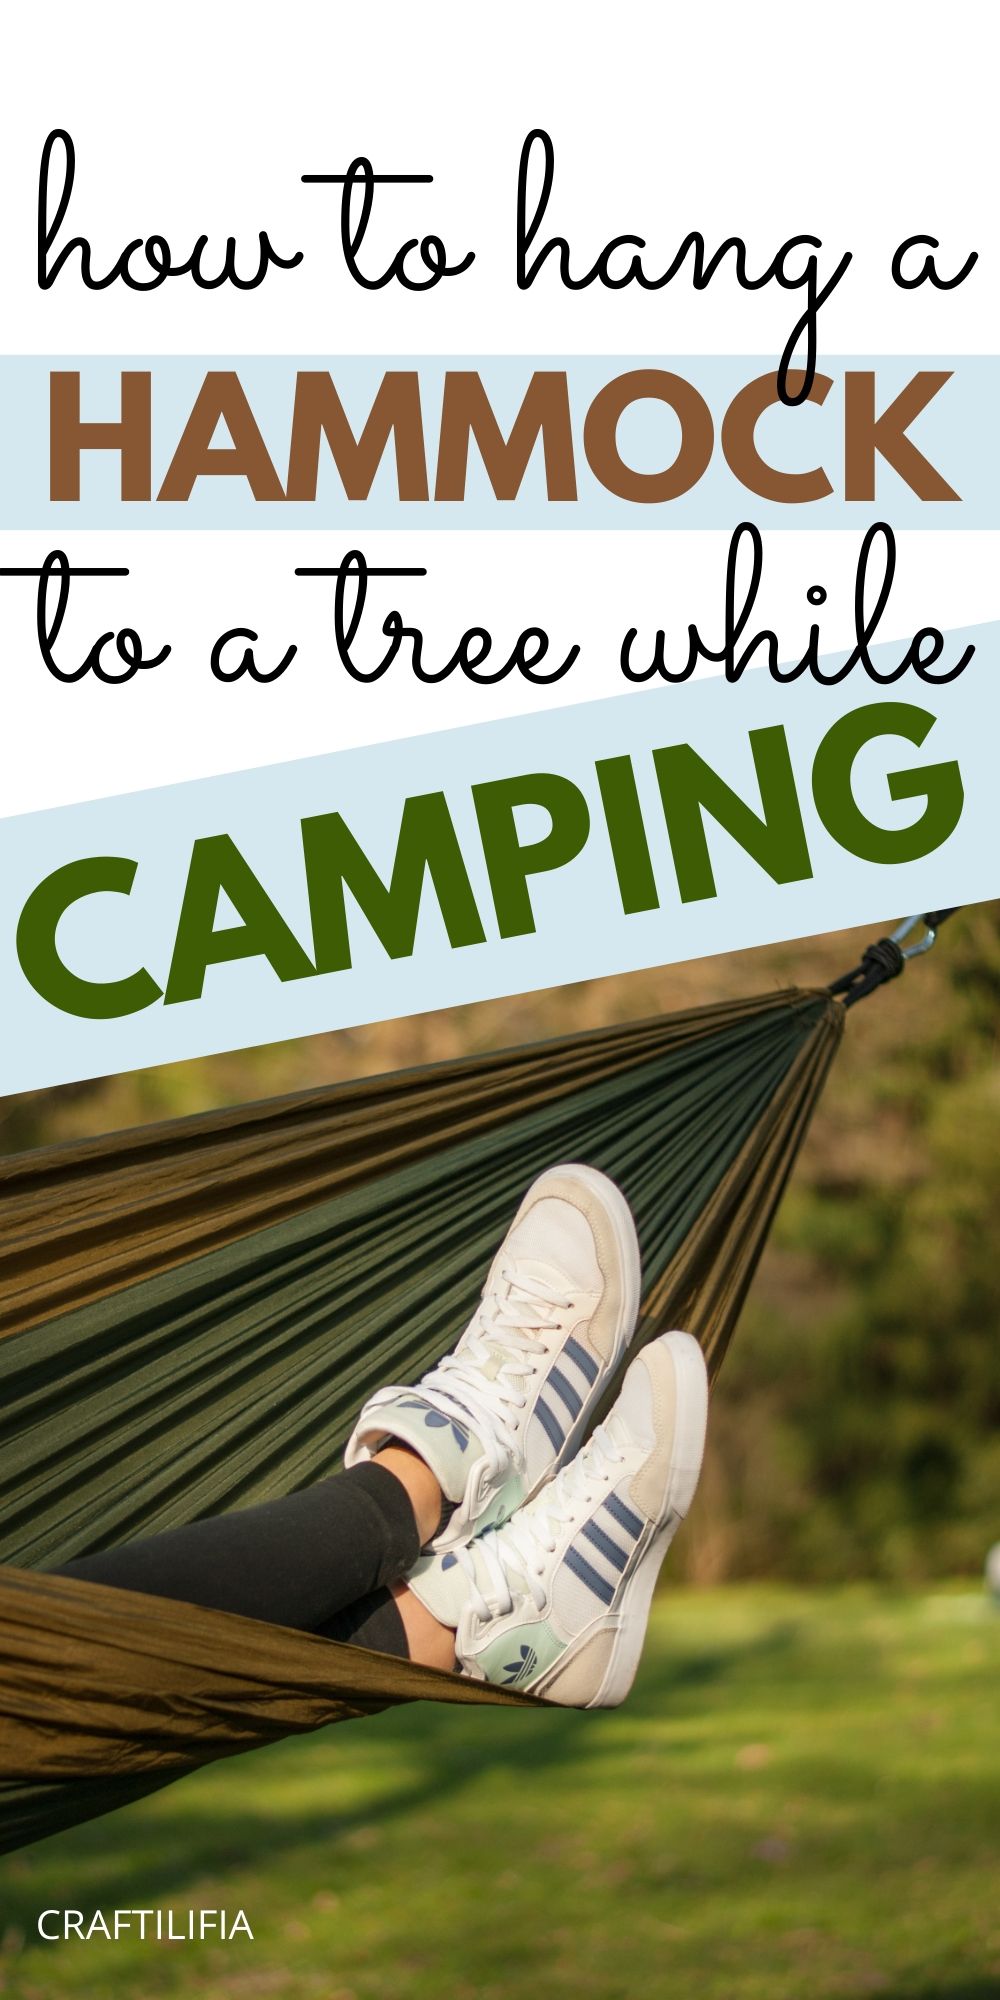 Learn to take your hammock along with you while you go camping. See step by step guide on how to hang a hammock to a tree without a stand and enjoy camping to its fullest!